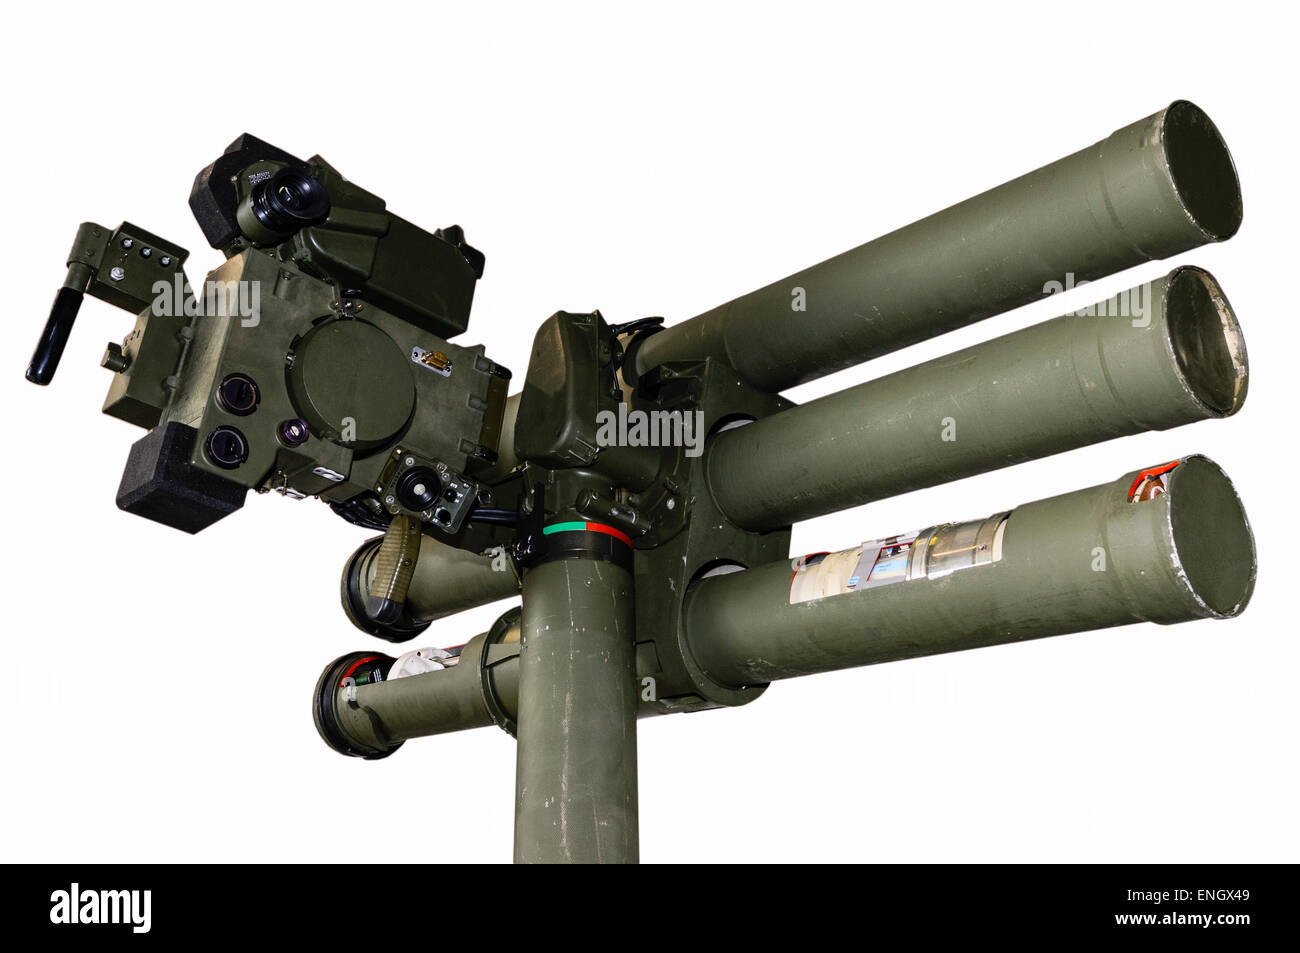 Thales Starstreak missile launch system Stock Photo, Royalty Free Image